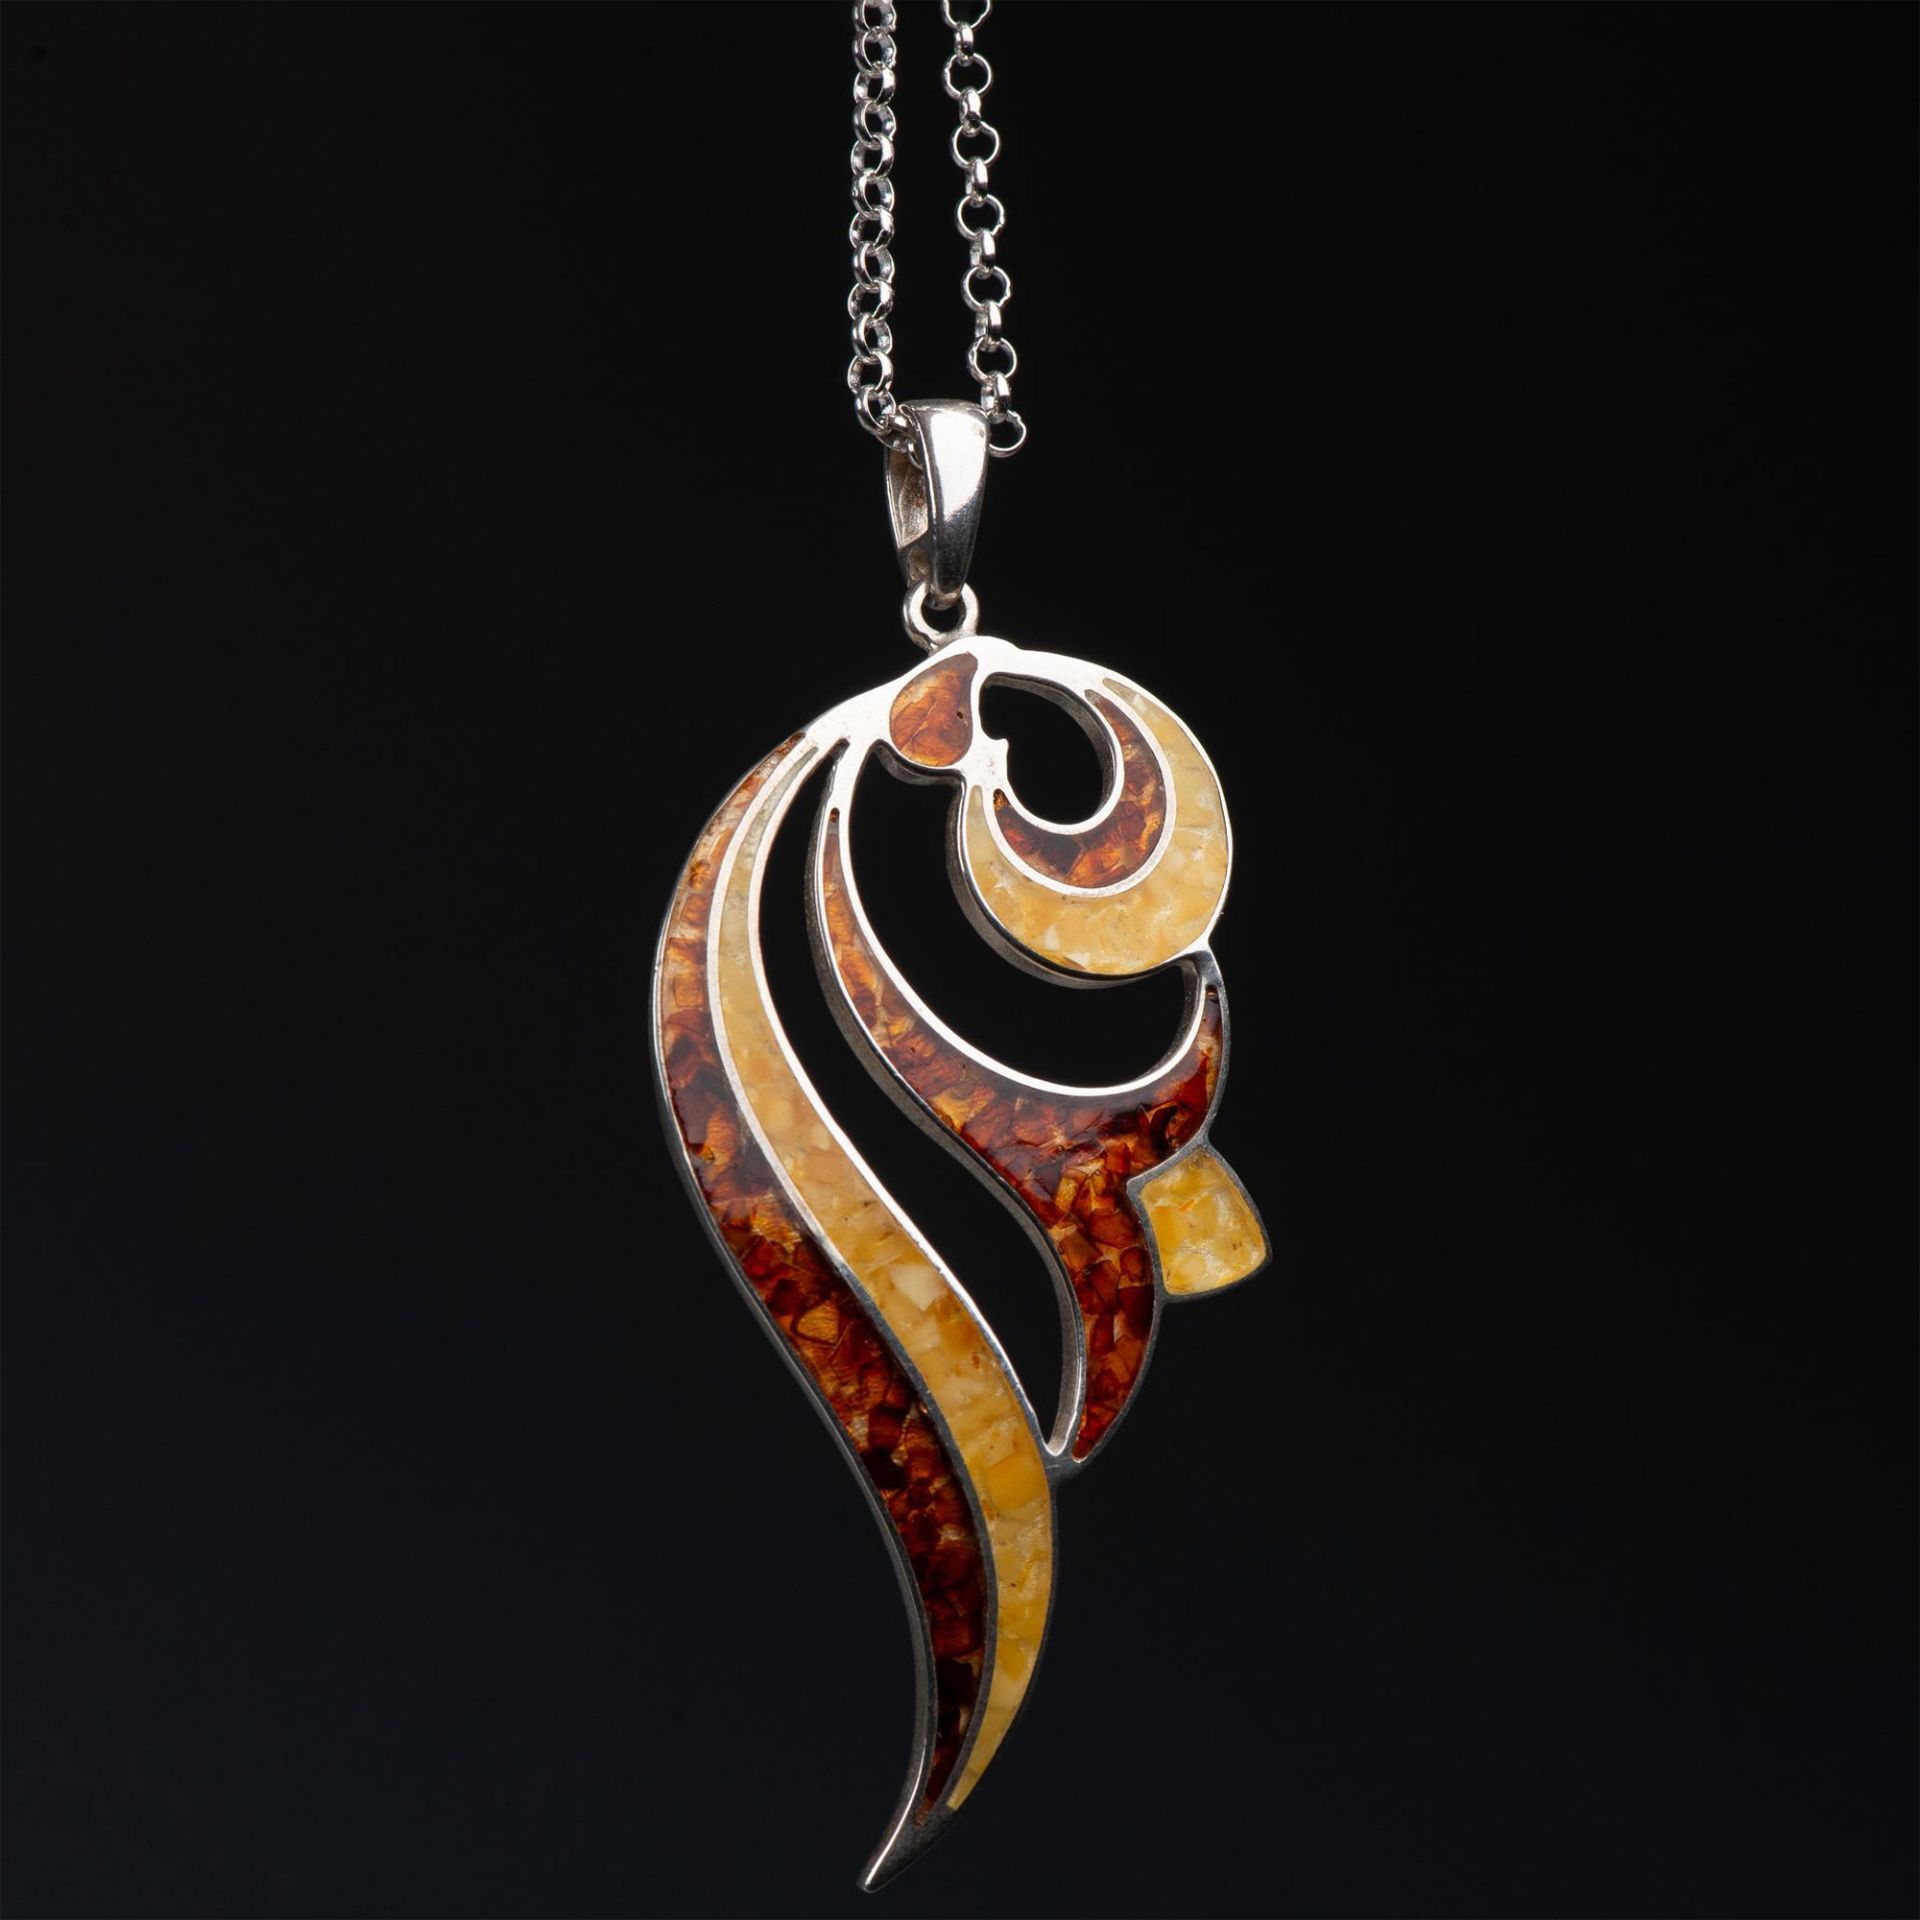 Sterling Silver and Baltic Amber Pendant Necklace - Image 2 of 3